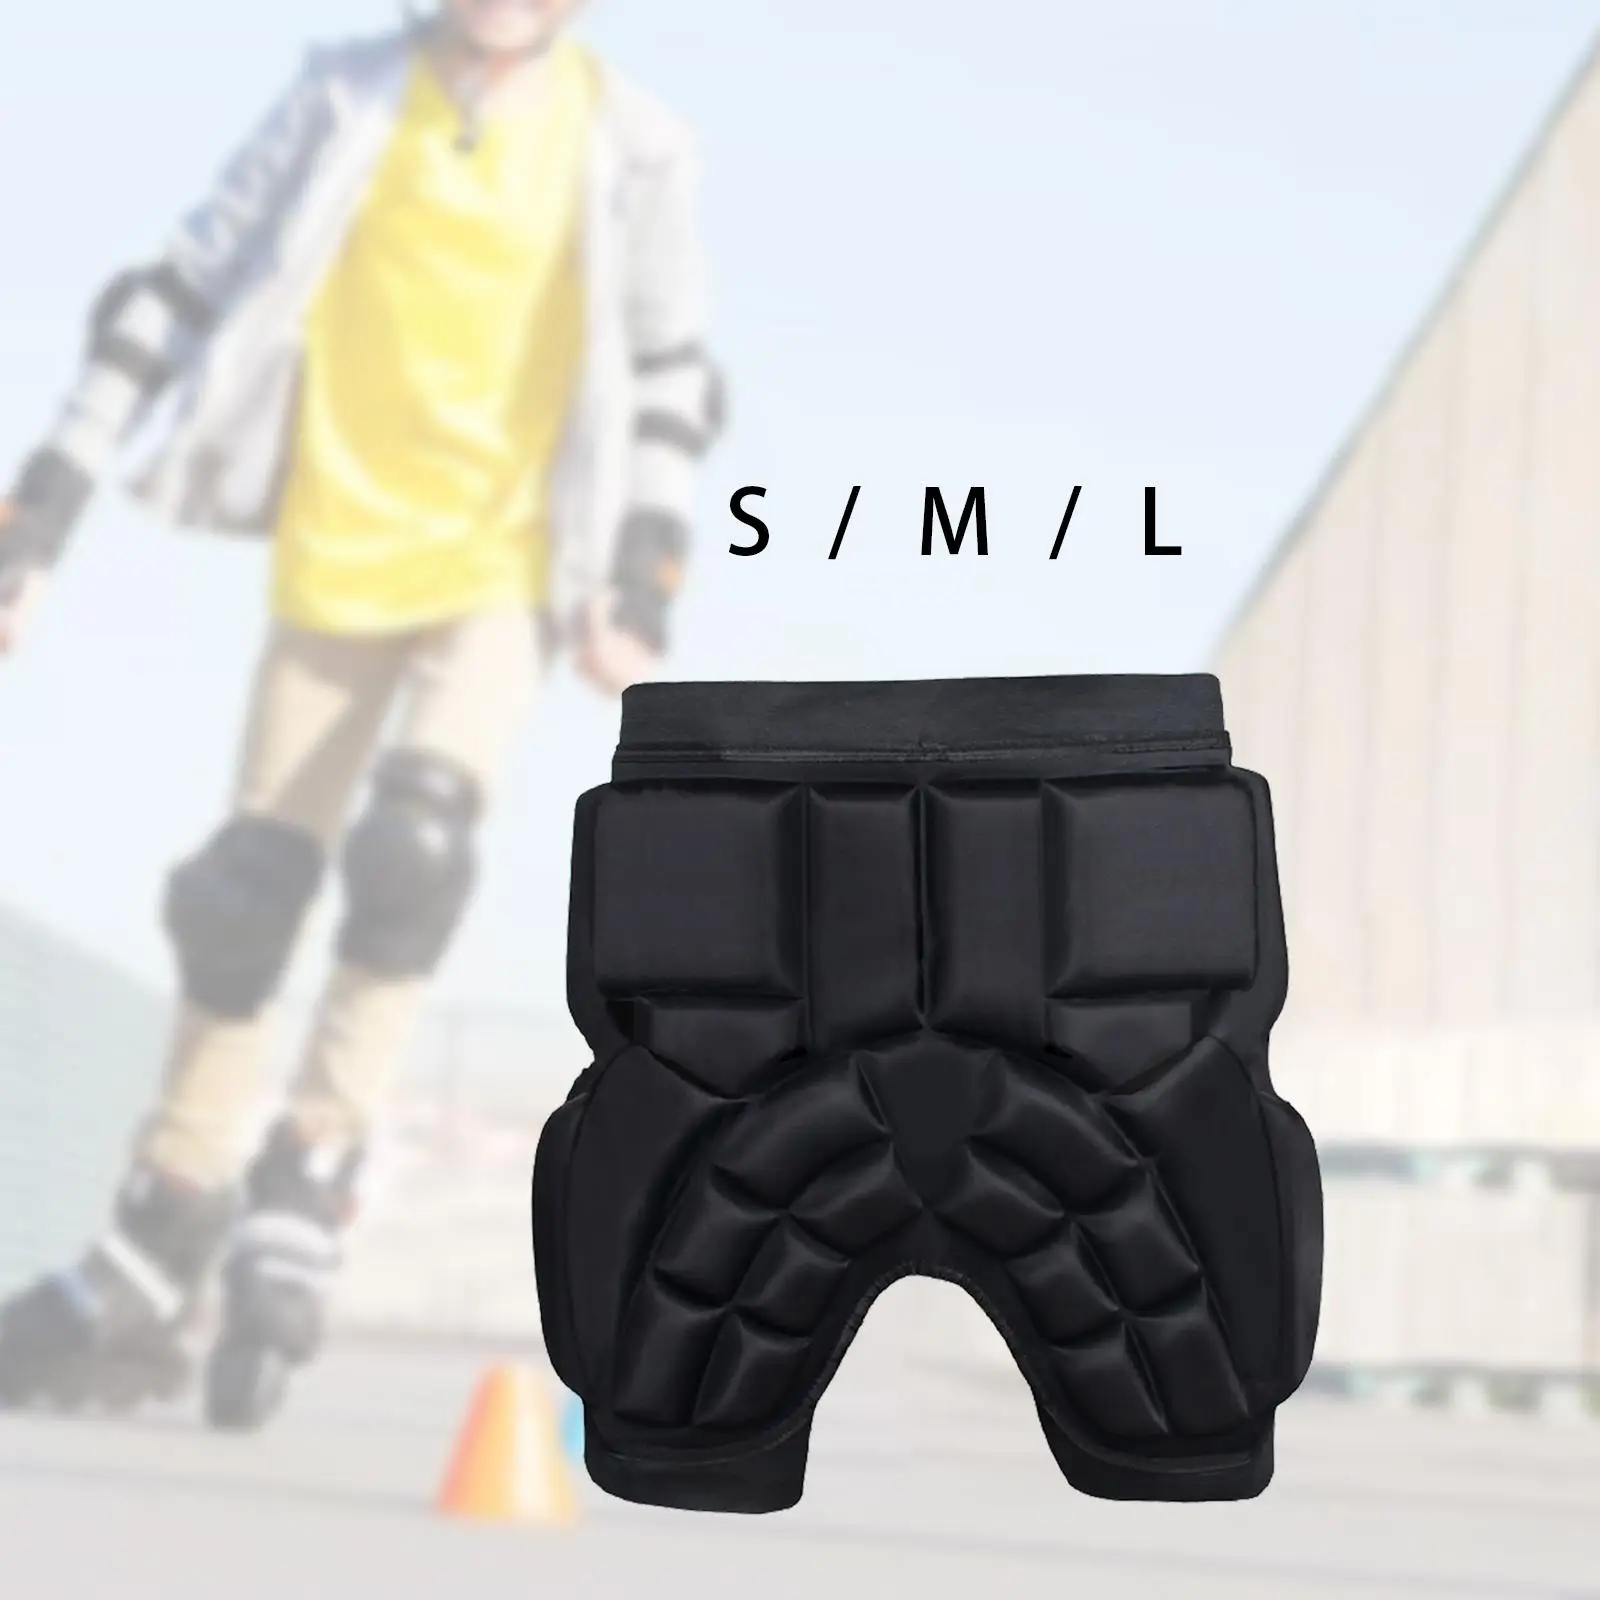 Hip Guard Pad Padded Supporter Shockproof Protector Compression Impact Protection for Skateboarding Skiing Cycling Biking Sports